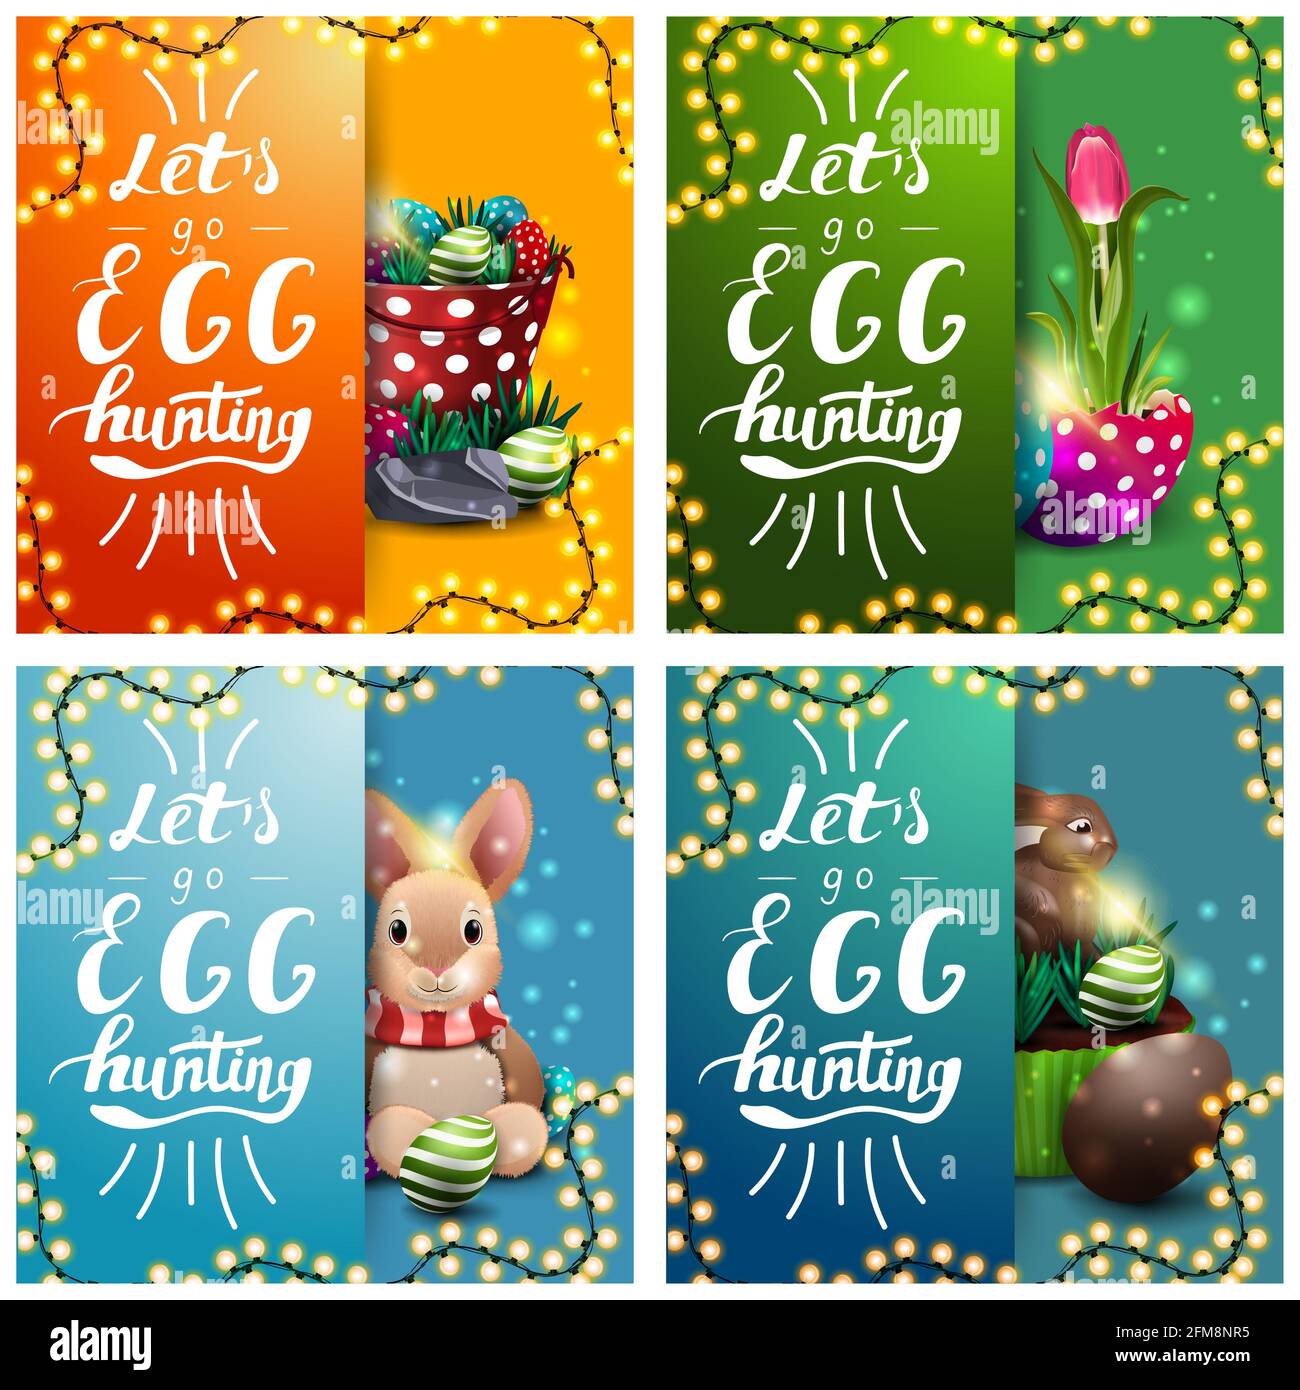 Let's go egg hunting, collection postcards with Easter icons and beautiful letterings in material design Stock Photo